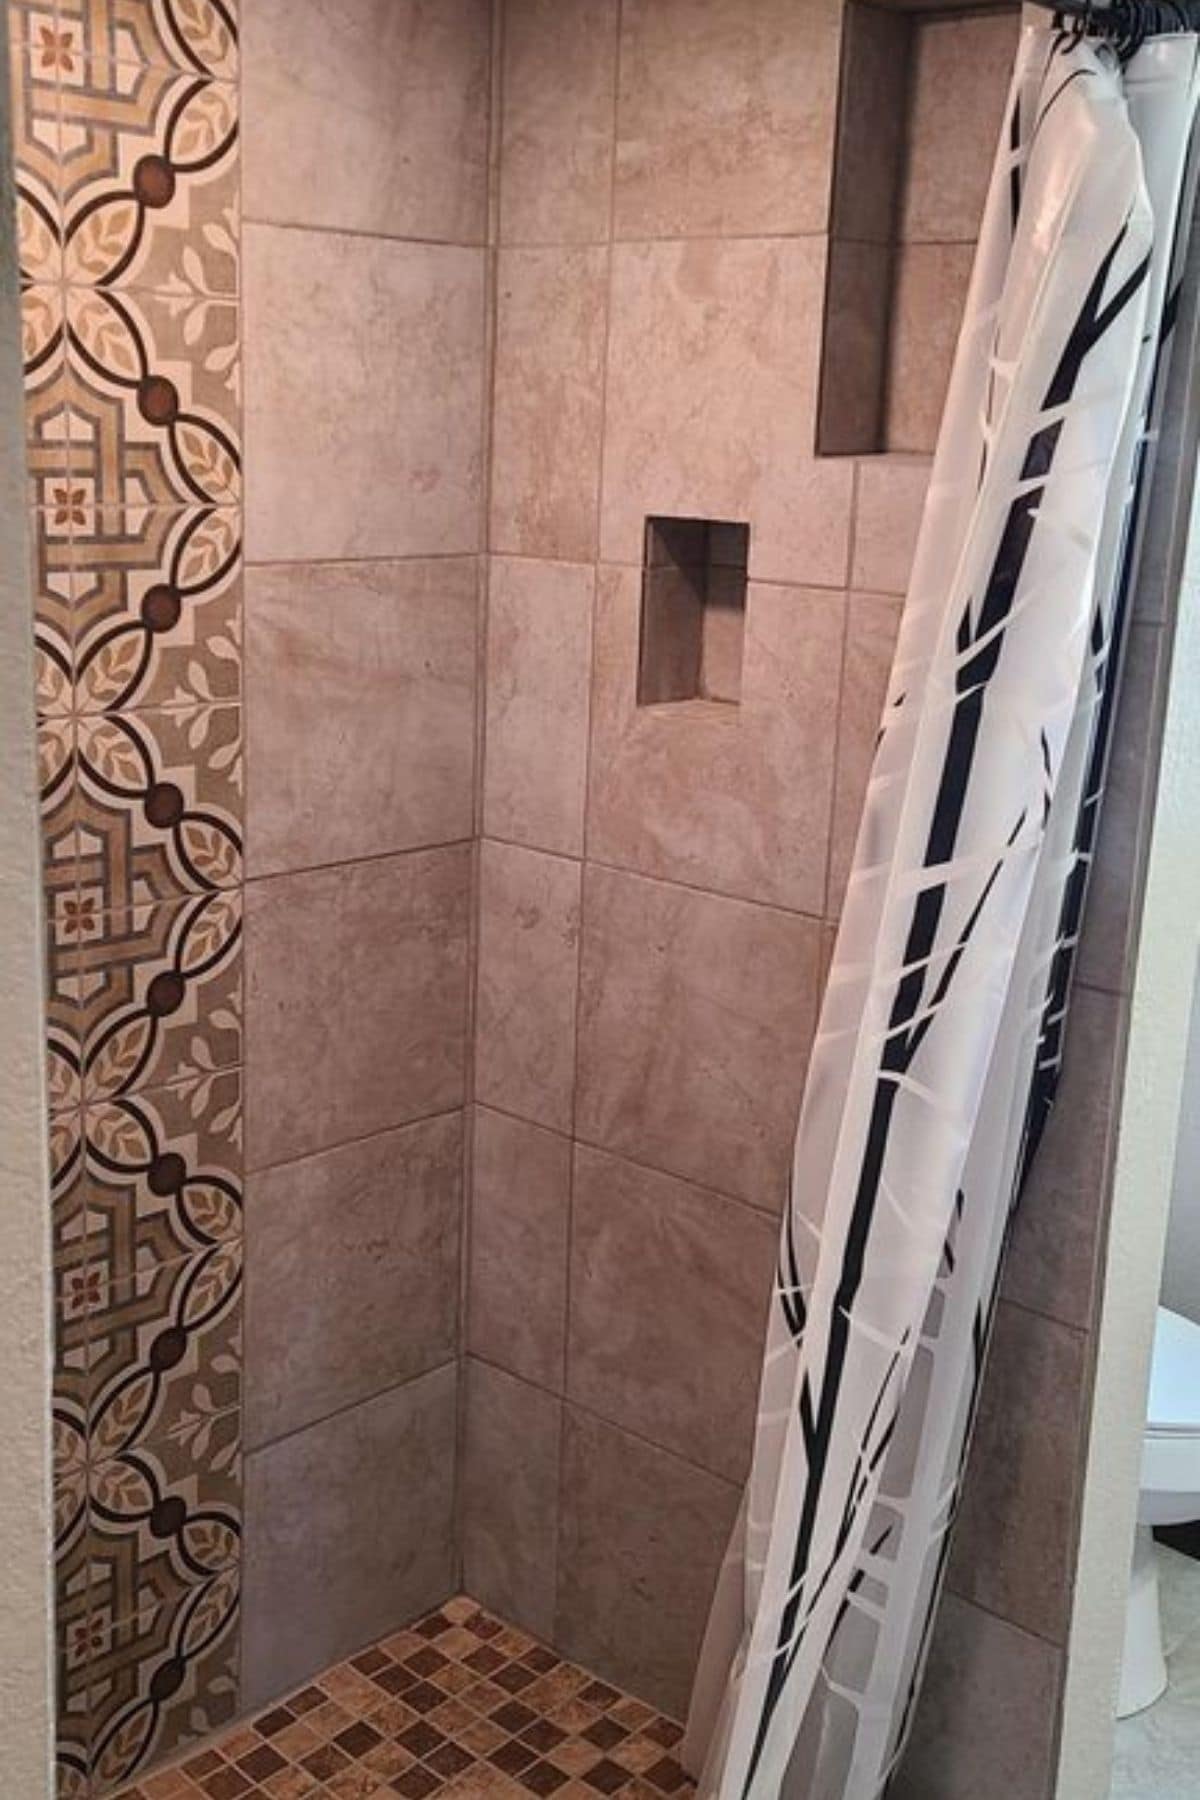 marble tile in shower stall